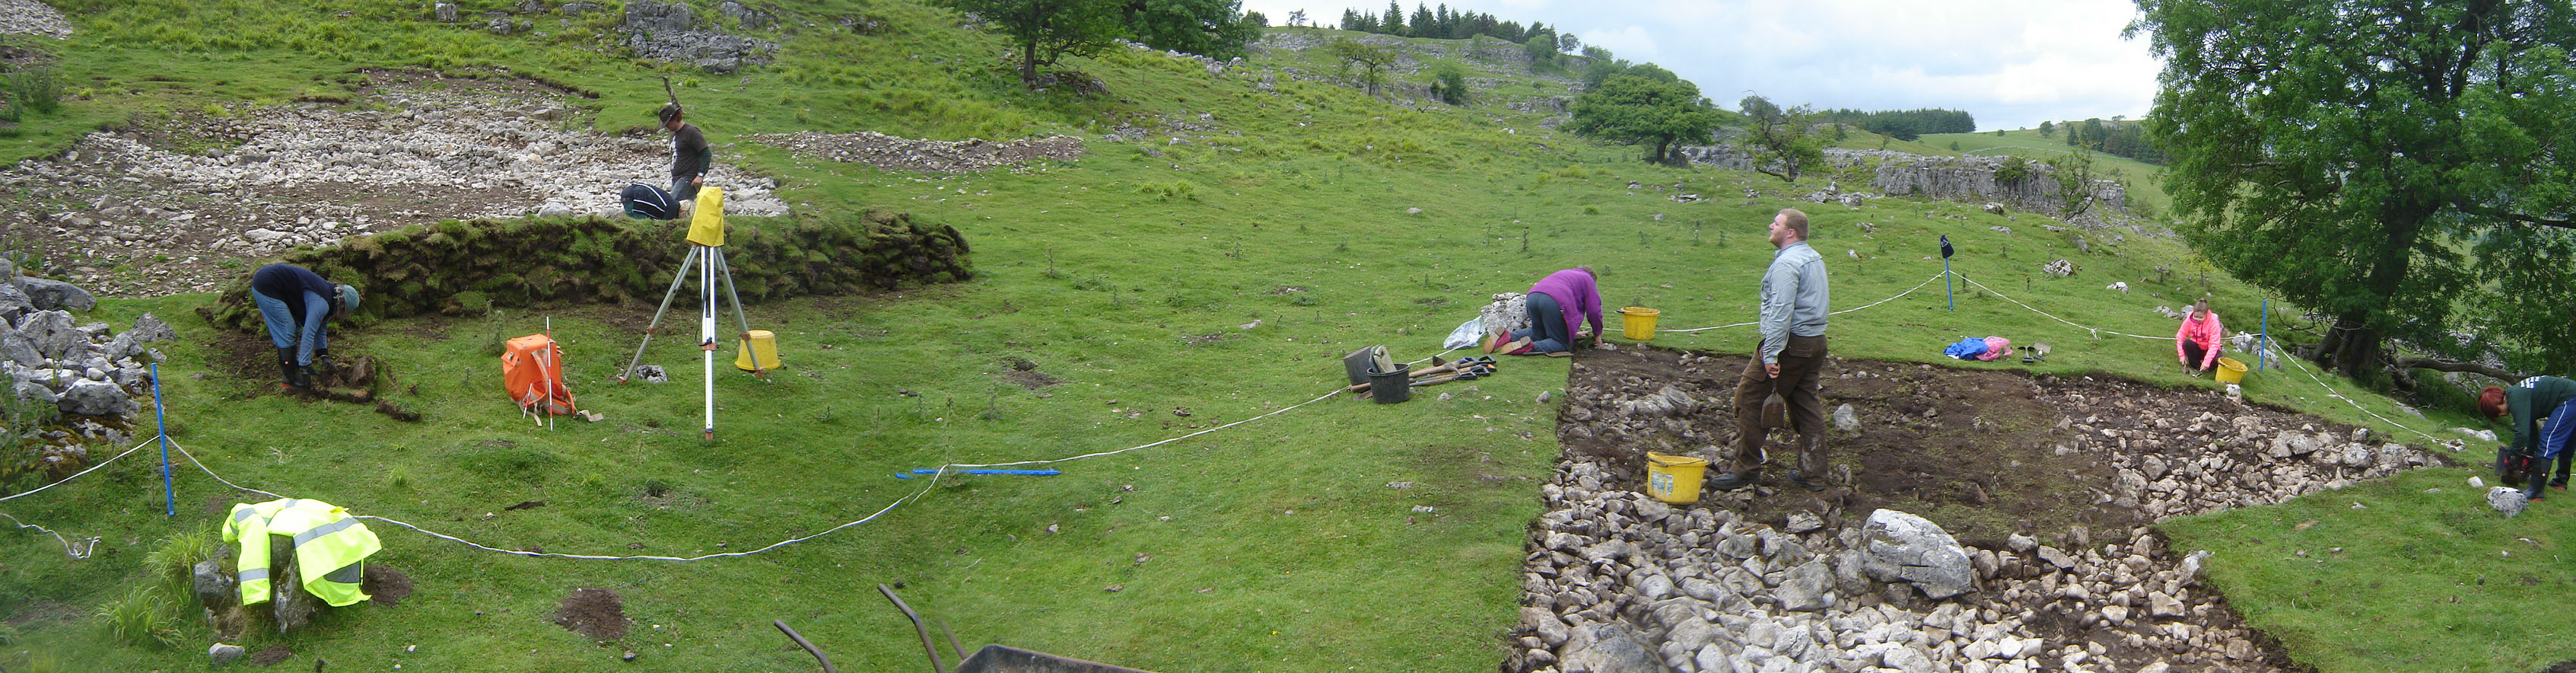 Roman Iron Age site in Upper Wharfdale, Yorkshire